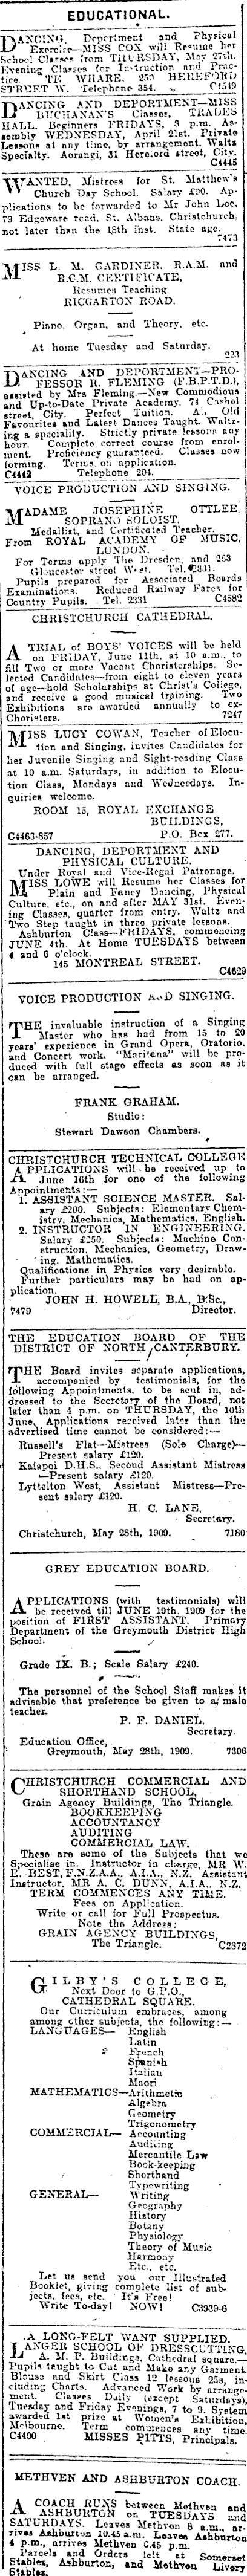 Papers Past Newspapers Press 5 June 1909 Page 13 Advertisements Column 5